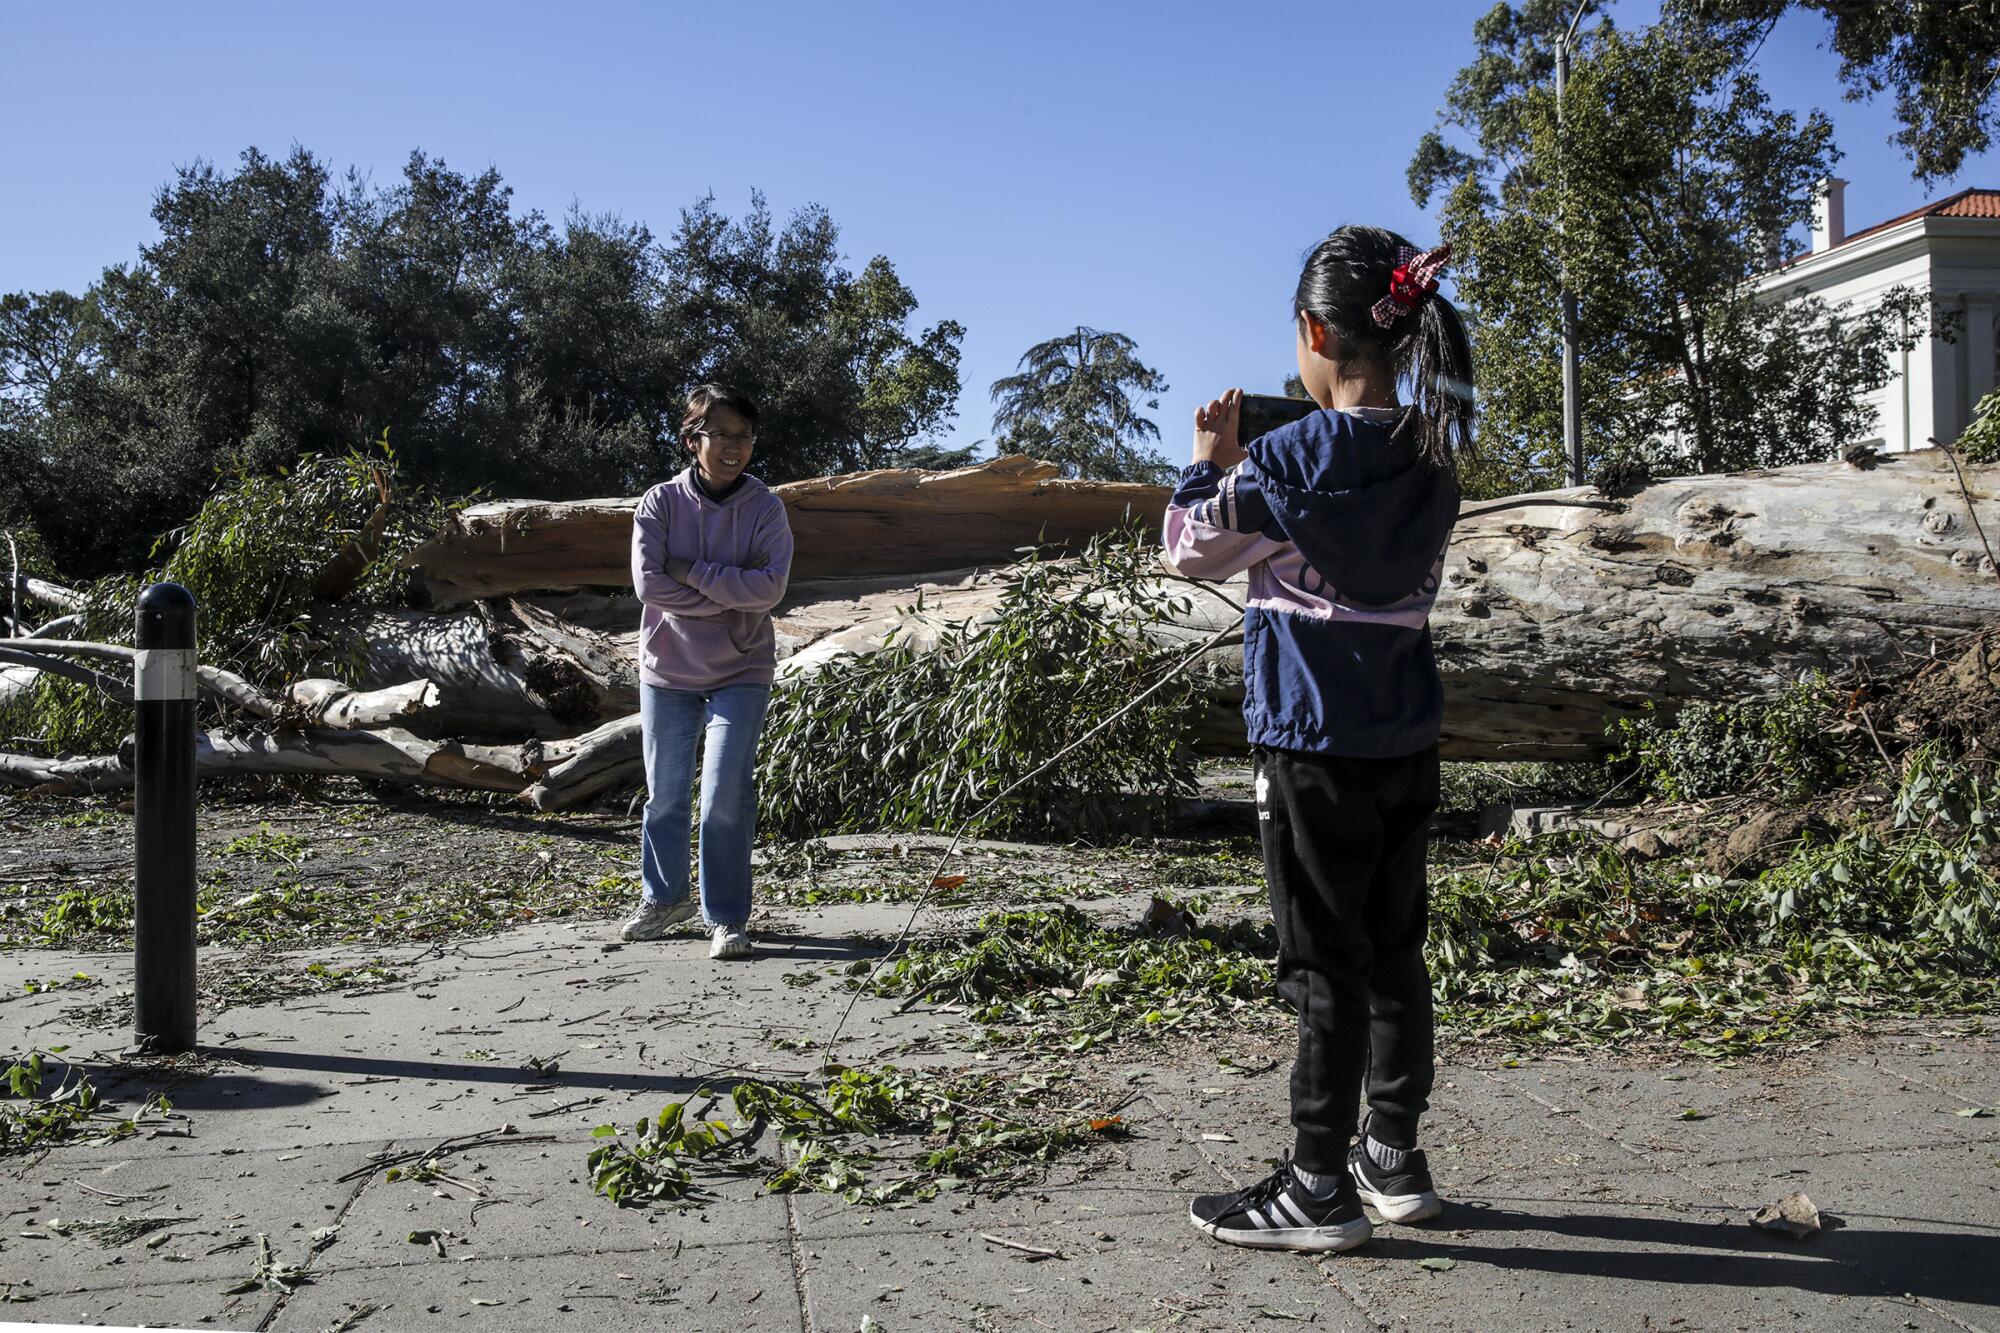 A child takes a photo of a woman with a felled tree